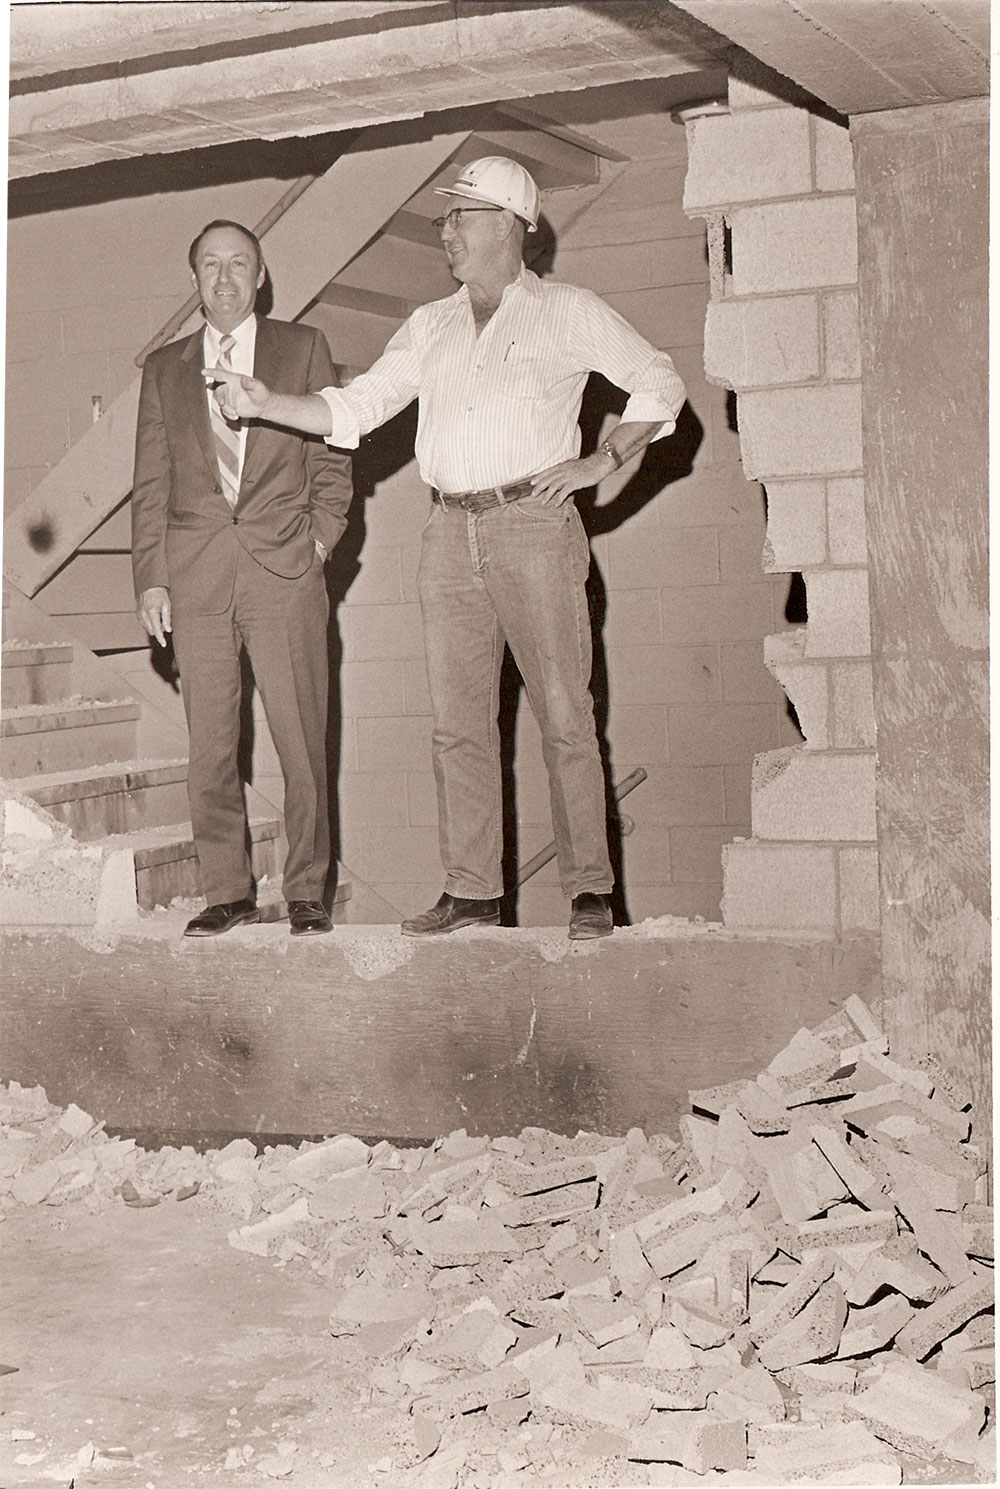 (FNB.2010.3.27) - Red Randolph (right) During Construction of First National Center, c. 1971